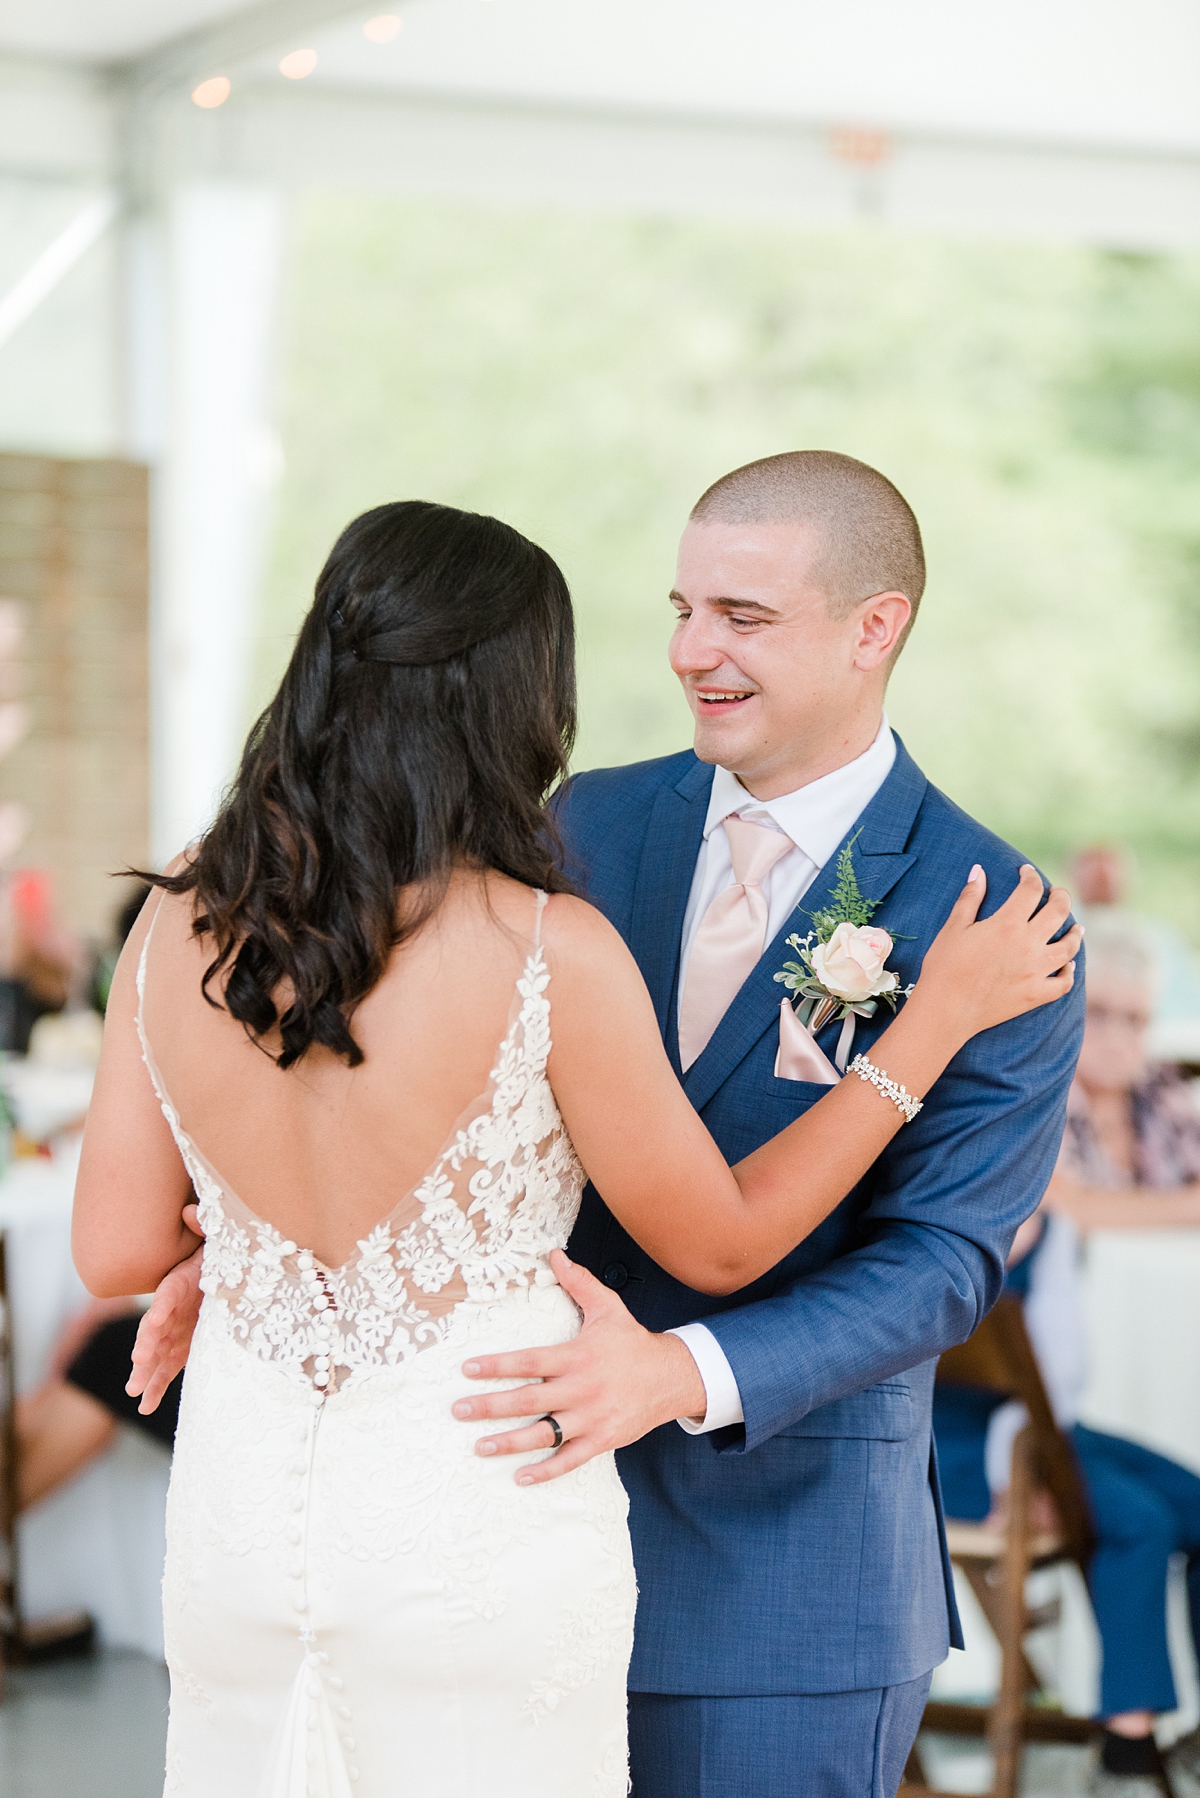 First Dance at Arbor Haven Summer Wedding Reception. Wedding Photography by Virginia Wedding Photographer Kailey Brianne Photography. 